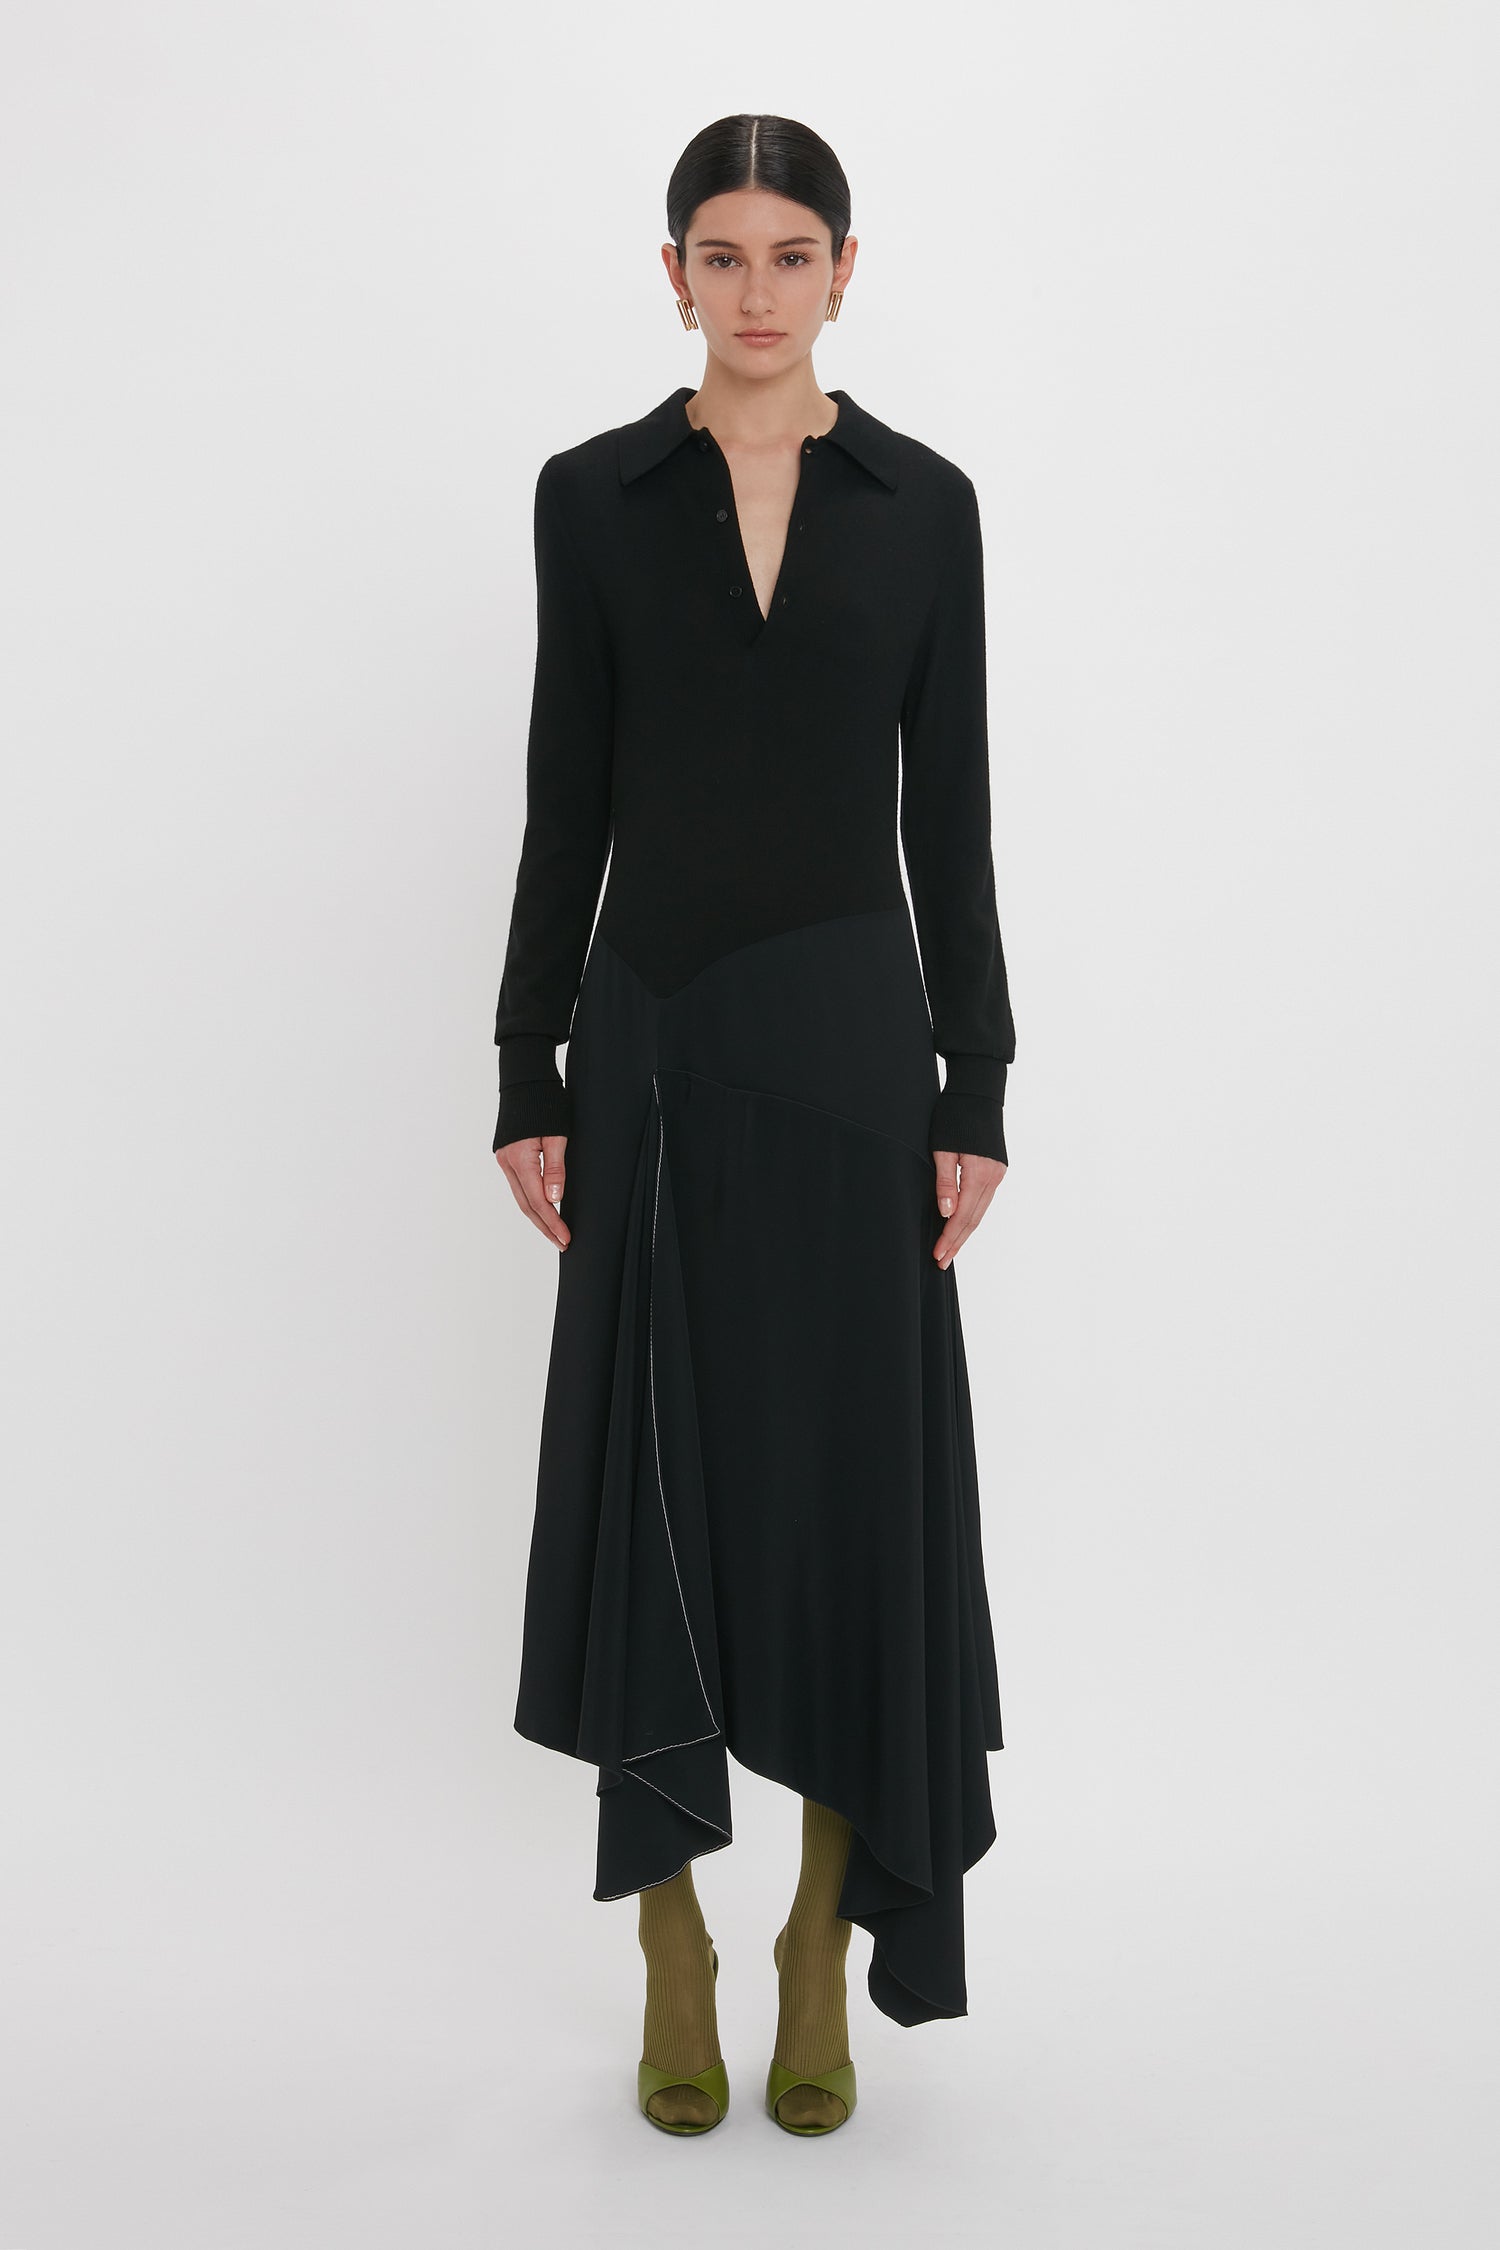 A person stands against a white background wearing a Victoria Beckham Henley Shirt Dress In Black with an asymmetrical hem and green shoes.